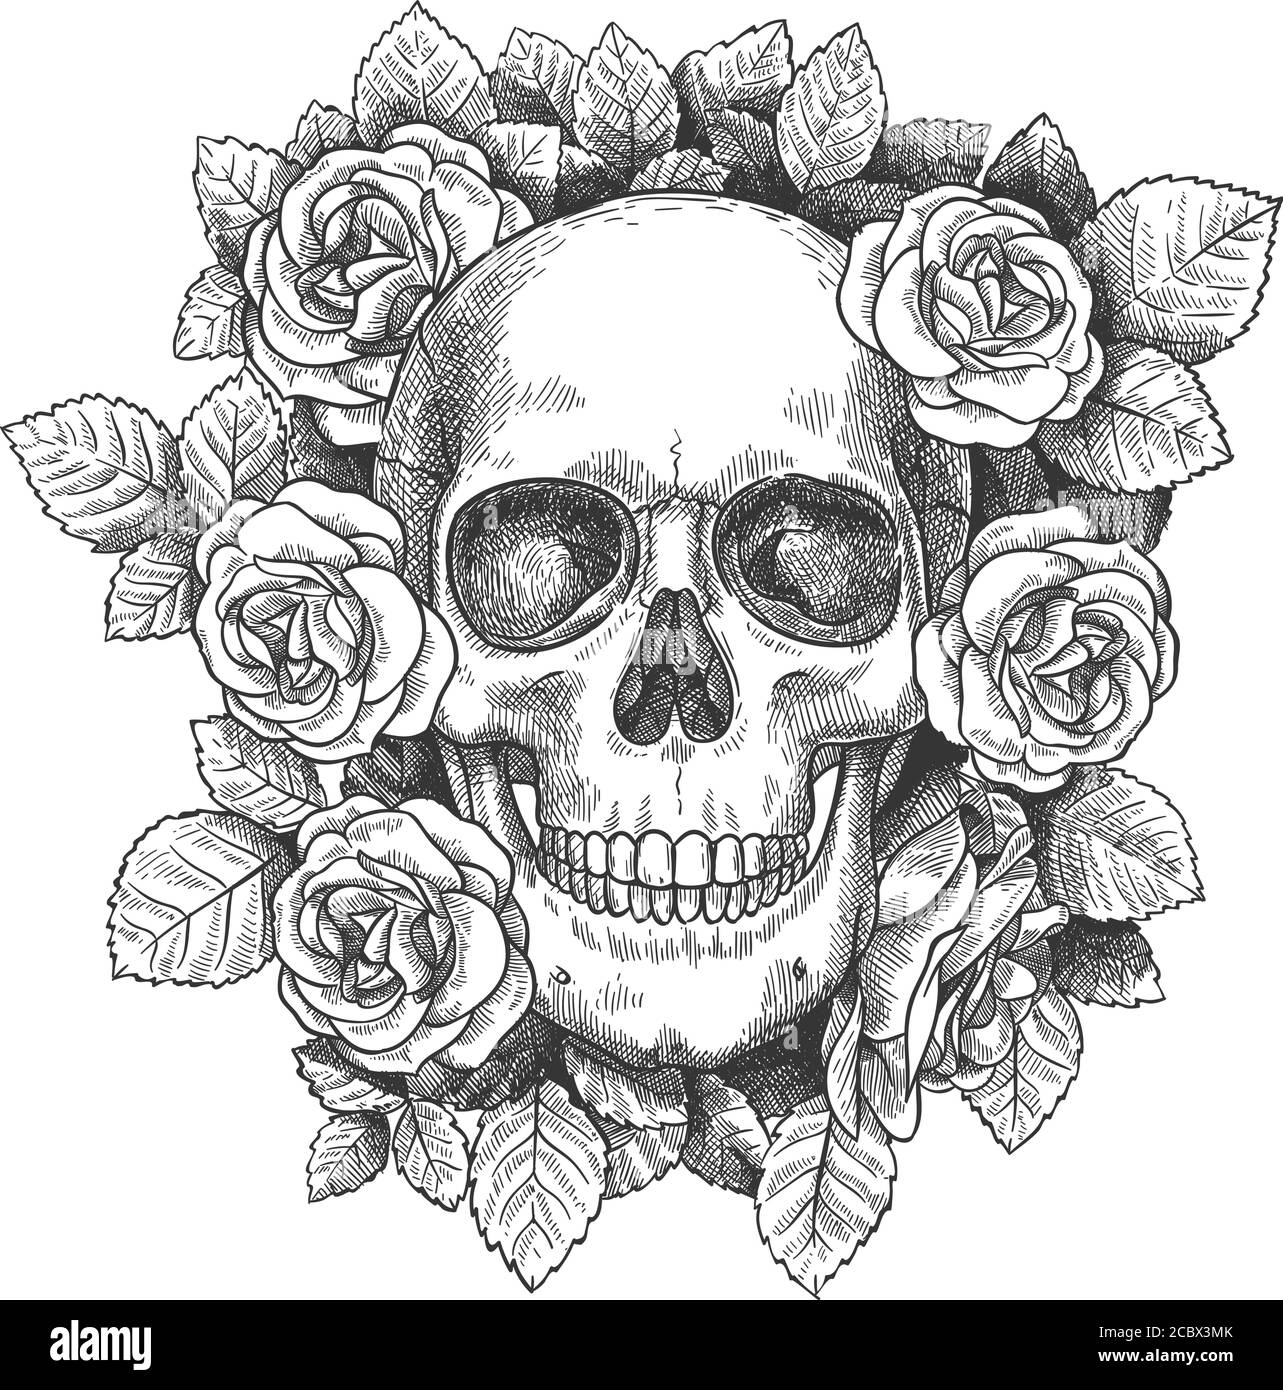 Skull with flowers. Sketch human skull with roses, traditional gothic black tattoo. Drawn monster halloween engraving vector artwork Stock Vector